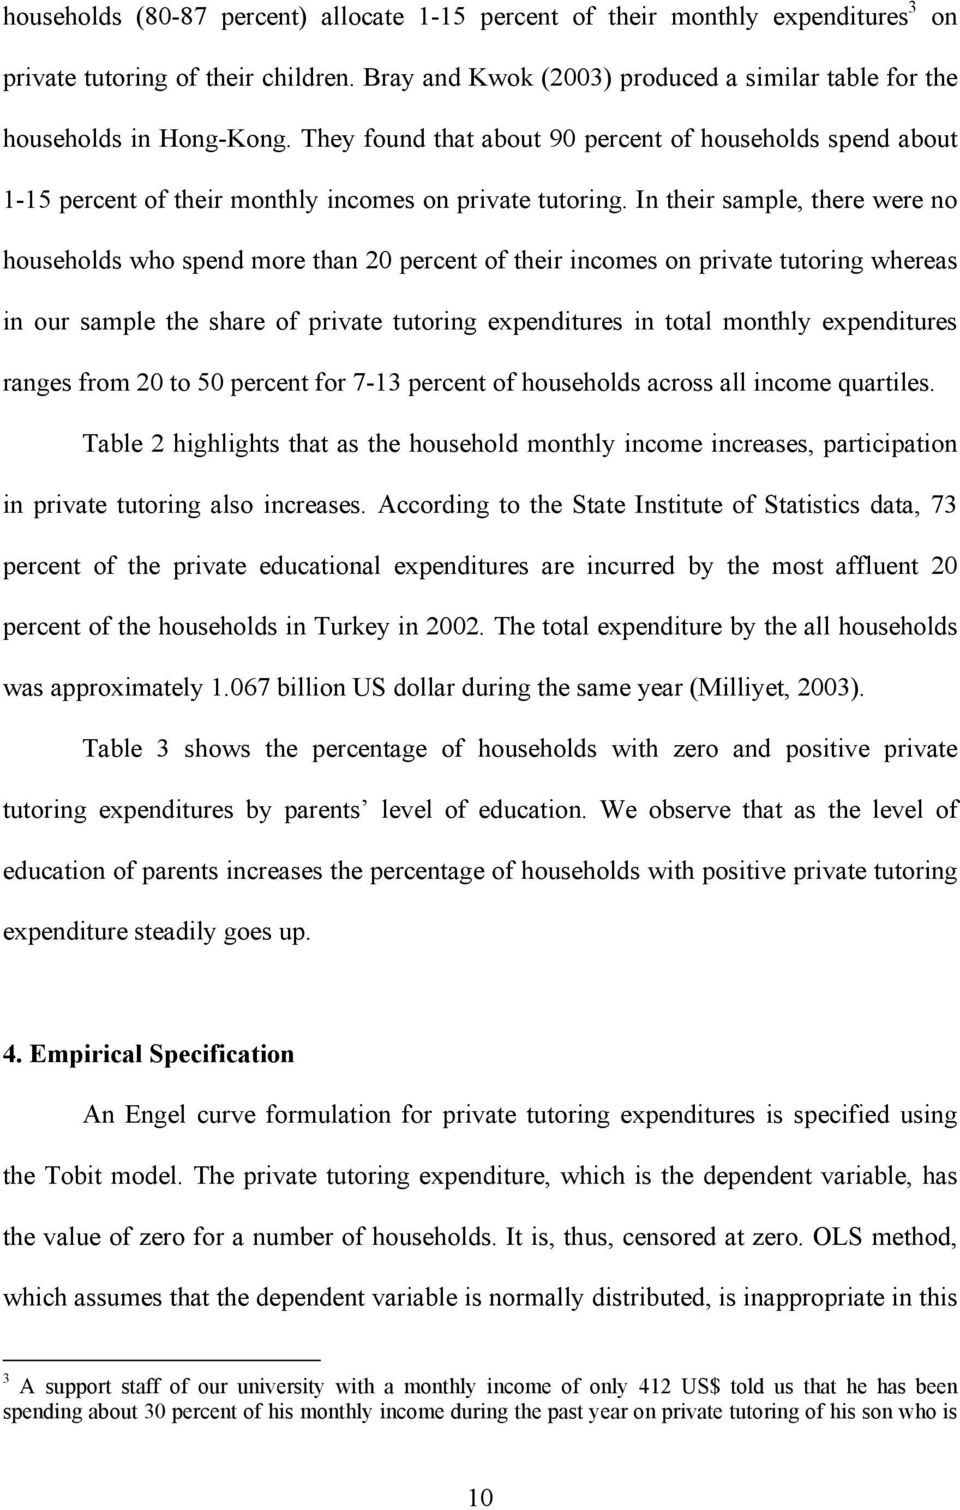 In their sample, there were no households who spend more than 20 percent of their incomes on private tutoring whereas in our sample the share of private tutoring expenditures in total monthly